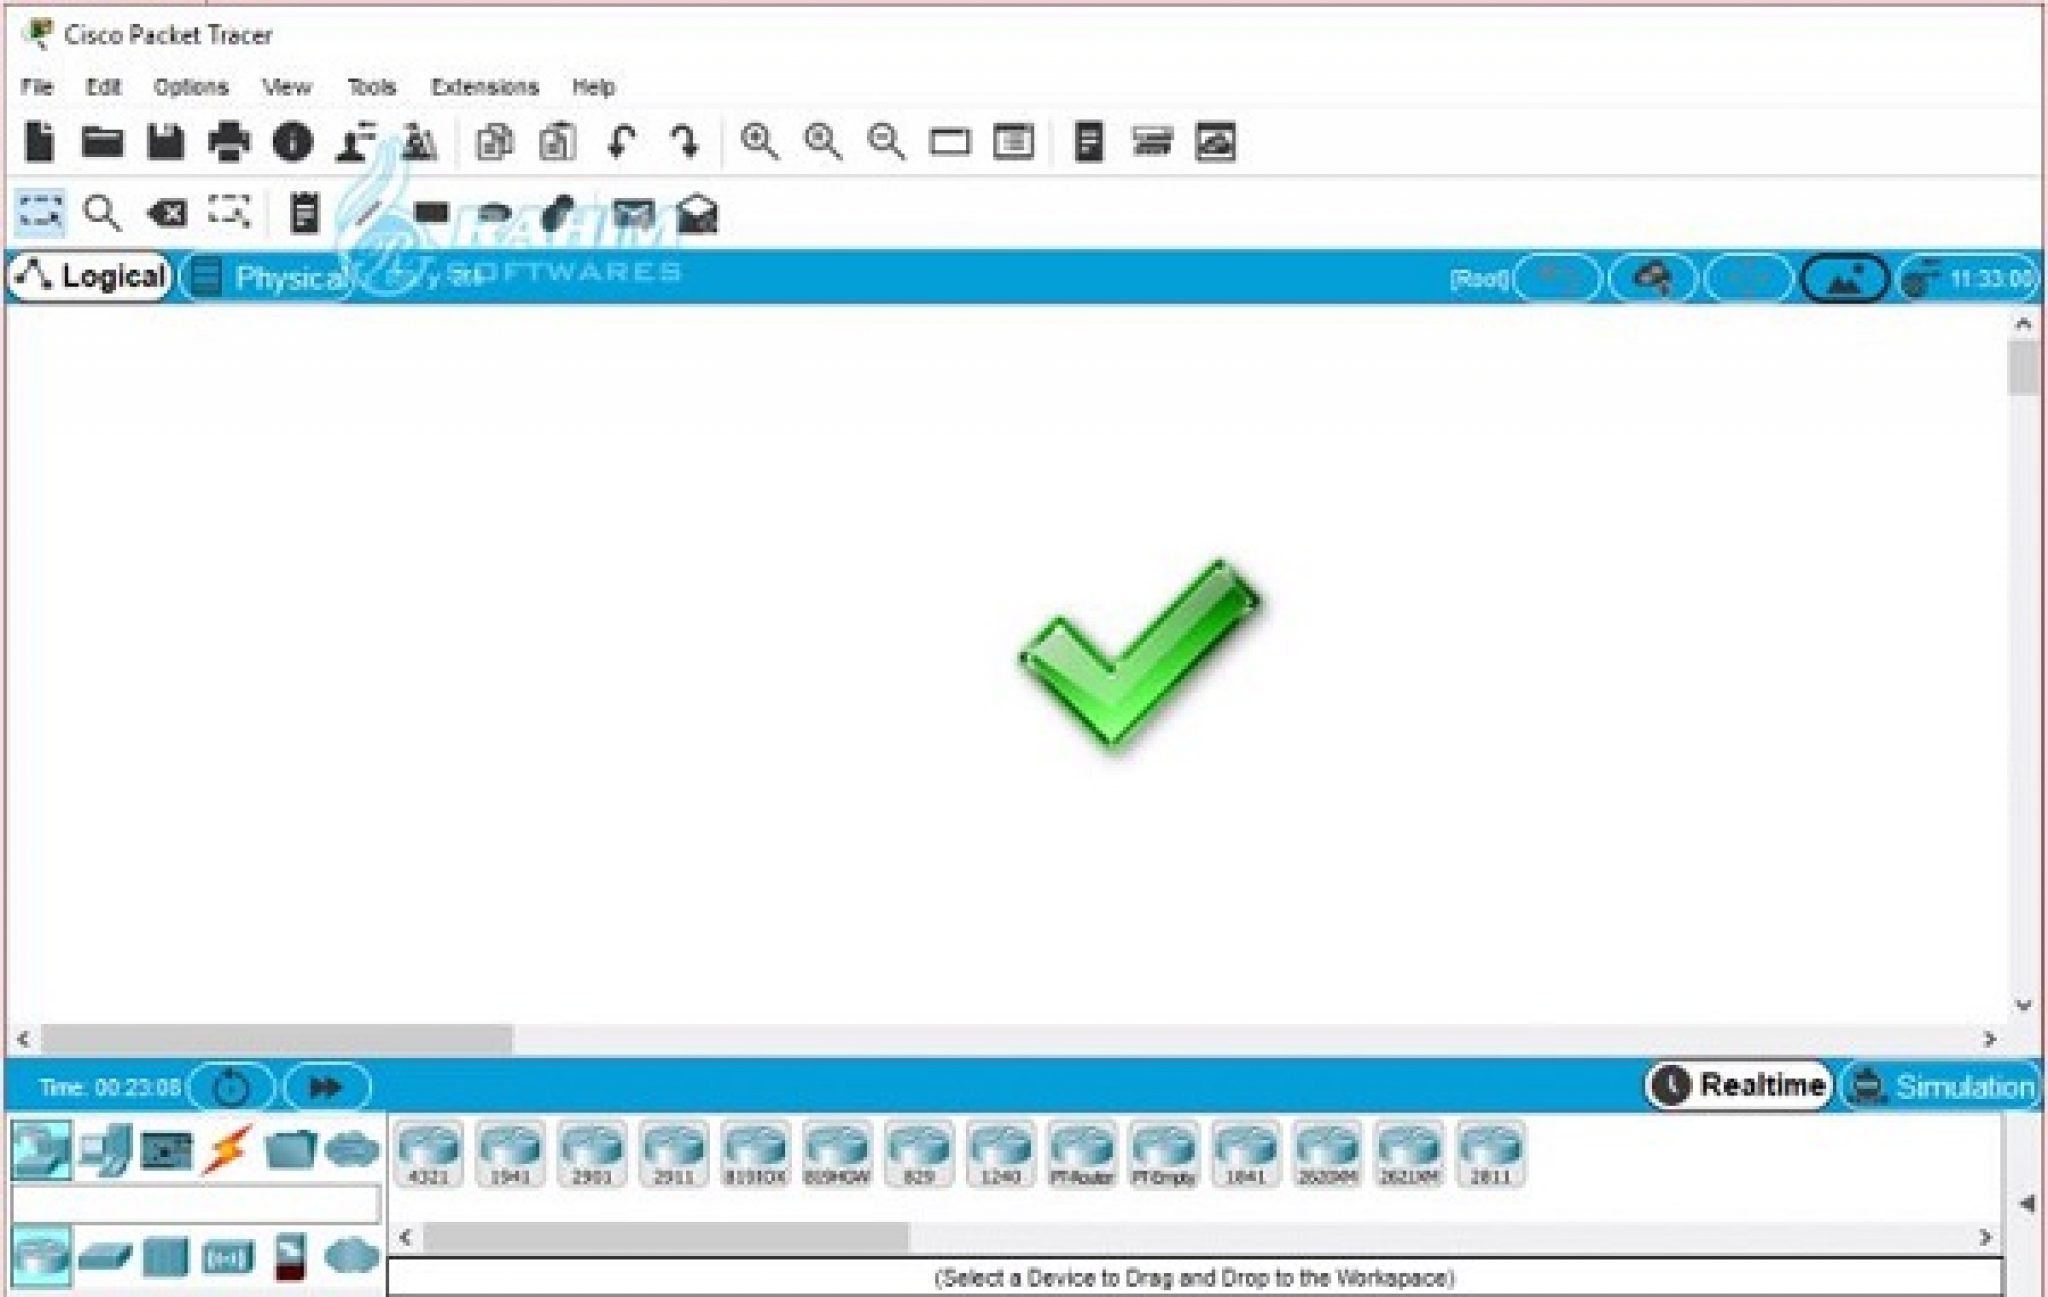 cisco packet tracer free download for windows 10 64 bit